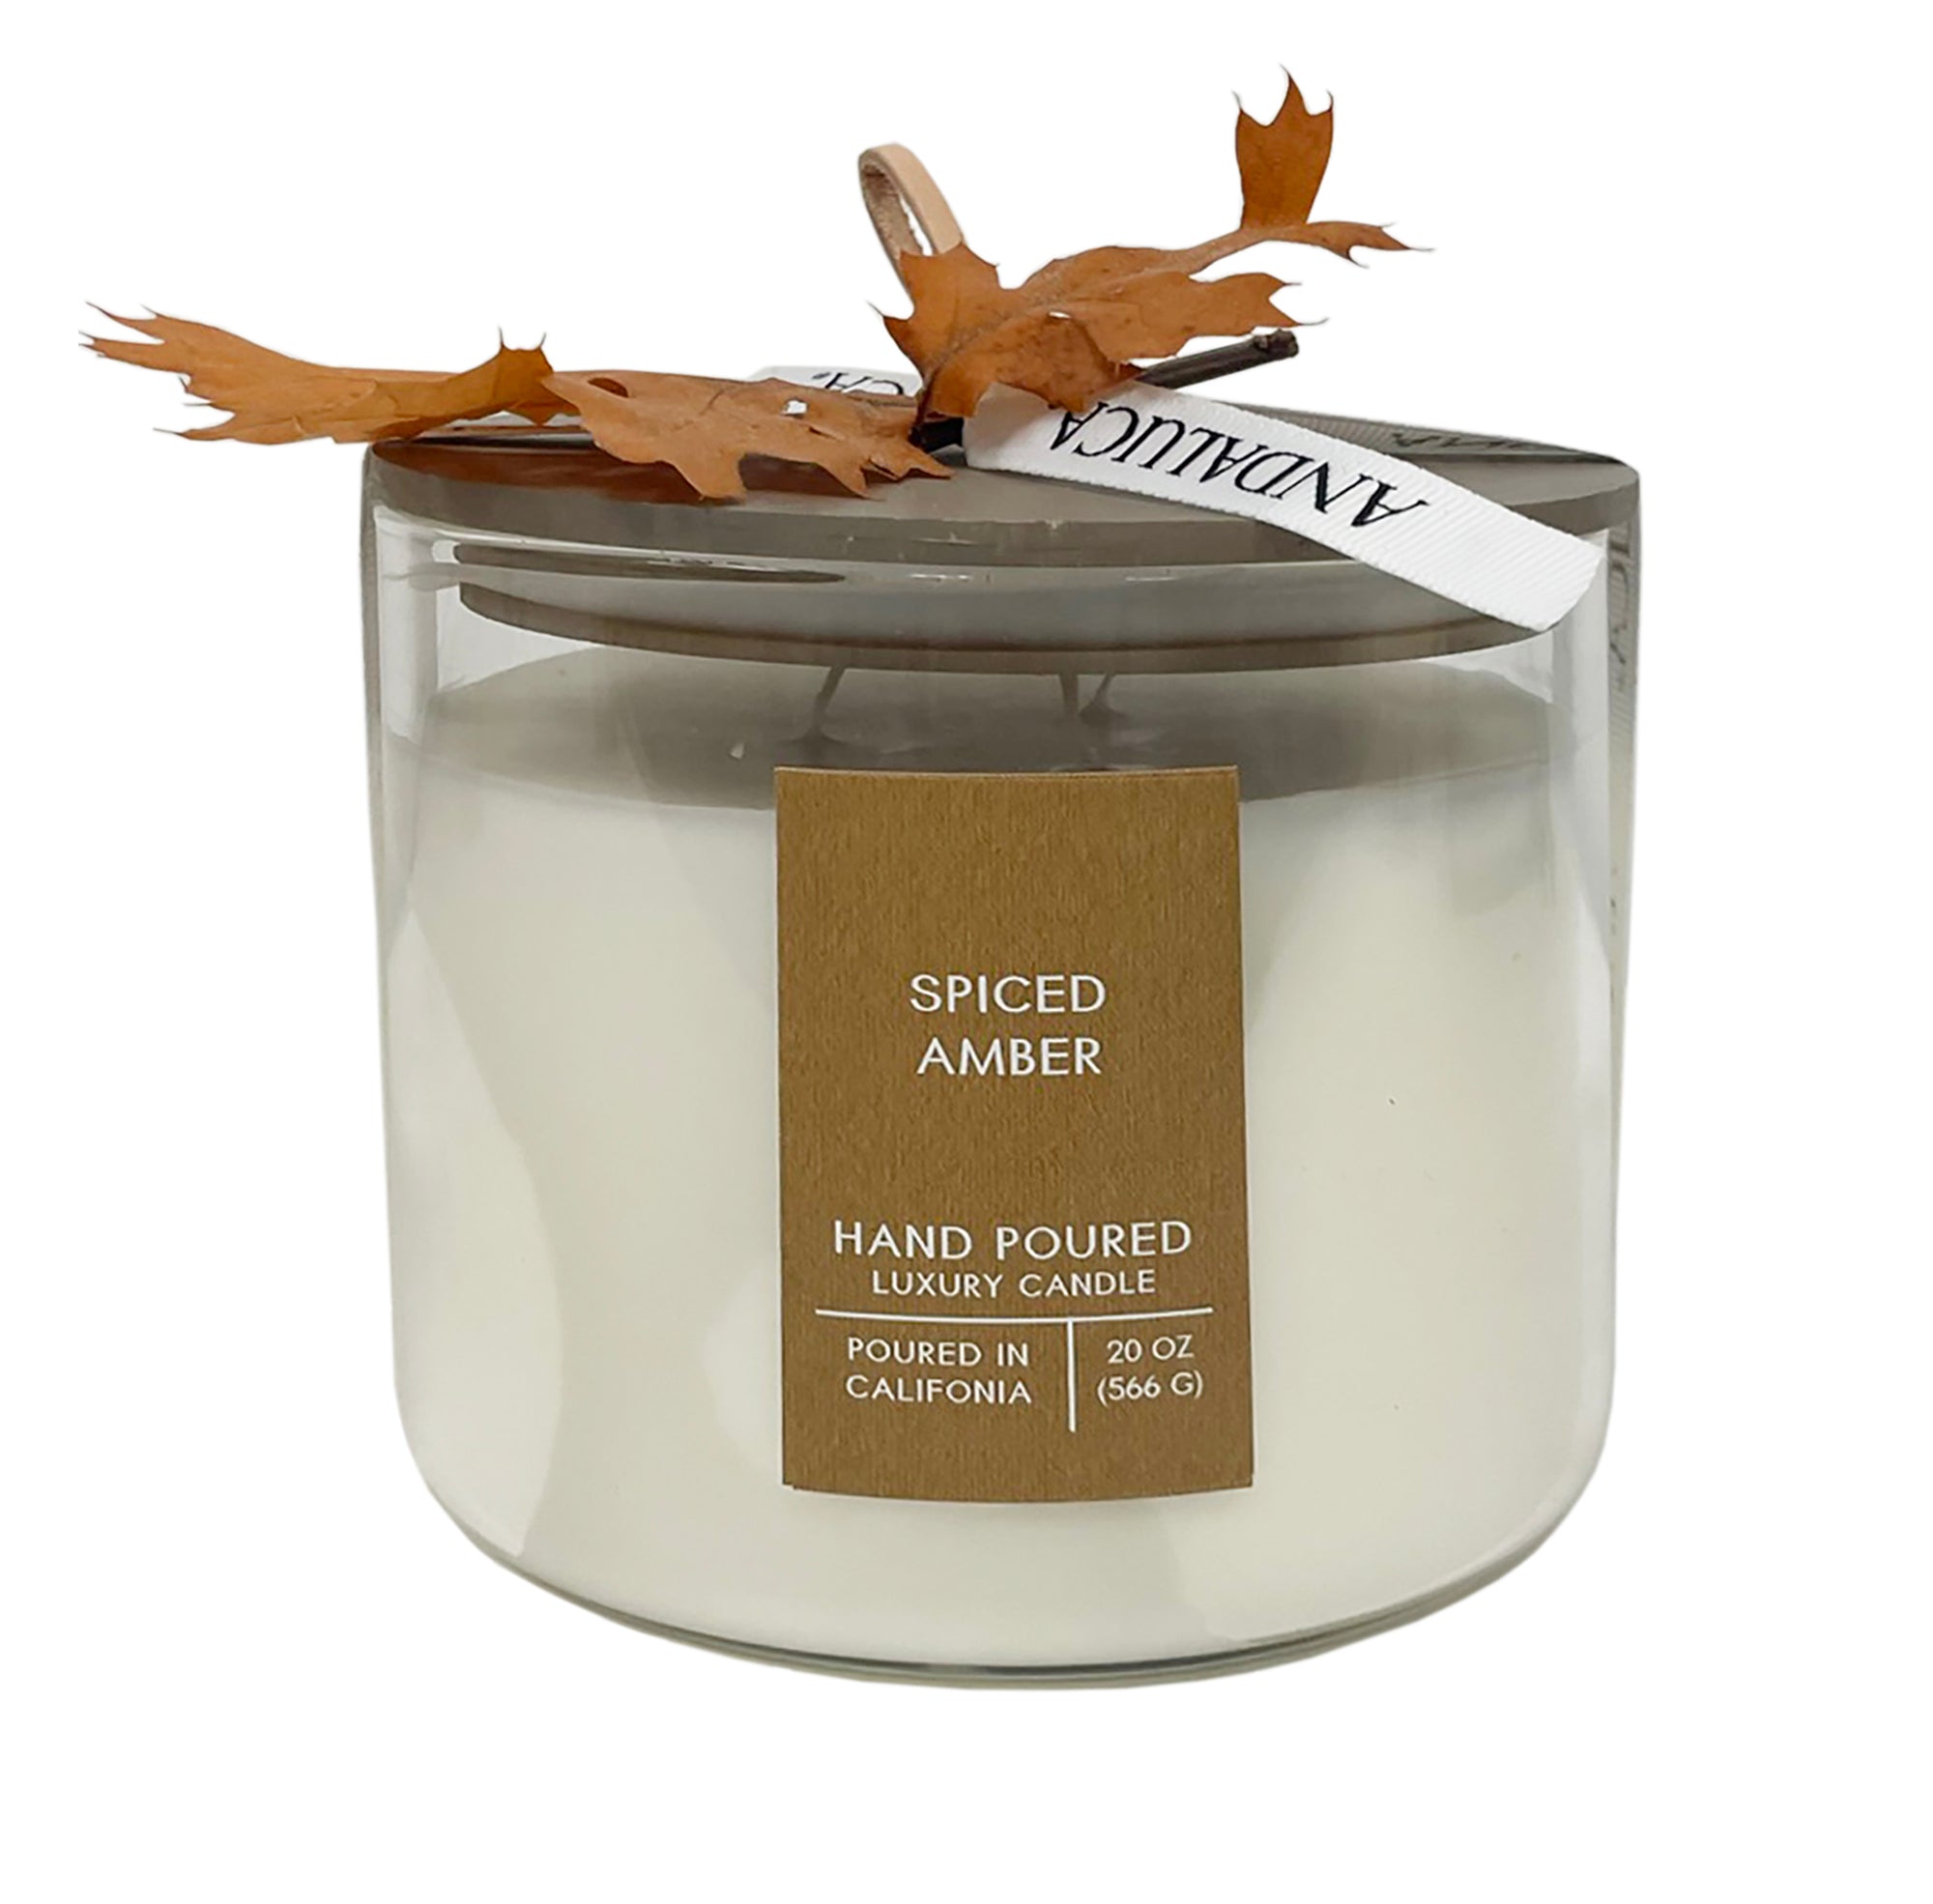 Spiced Amber Botanical Tie 20 oz. Candle with Lid